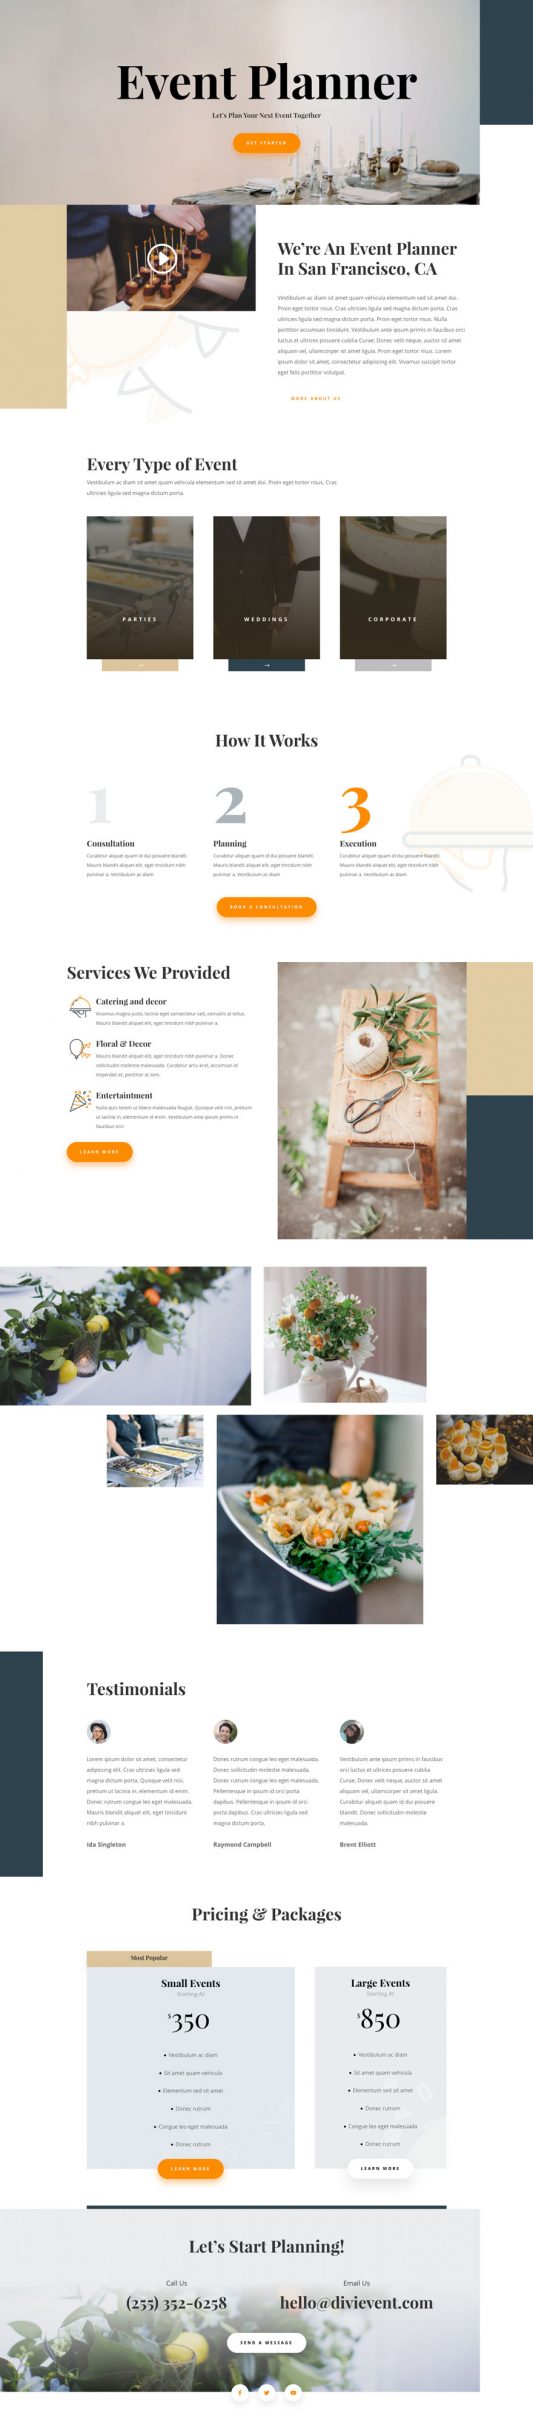 Event Planner Landing Page